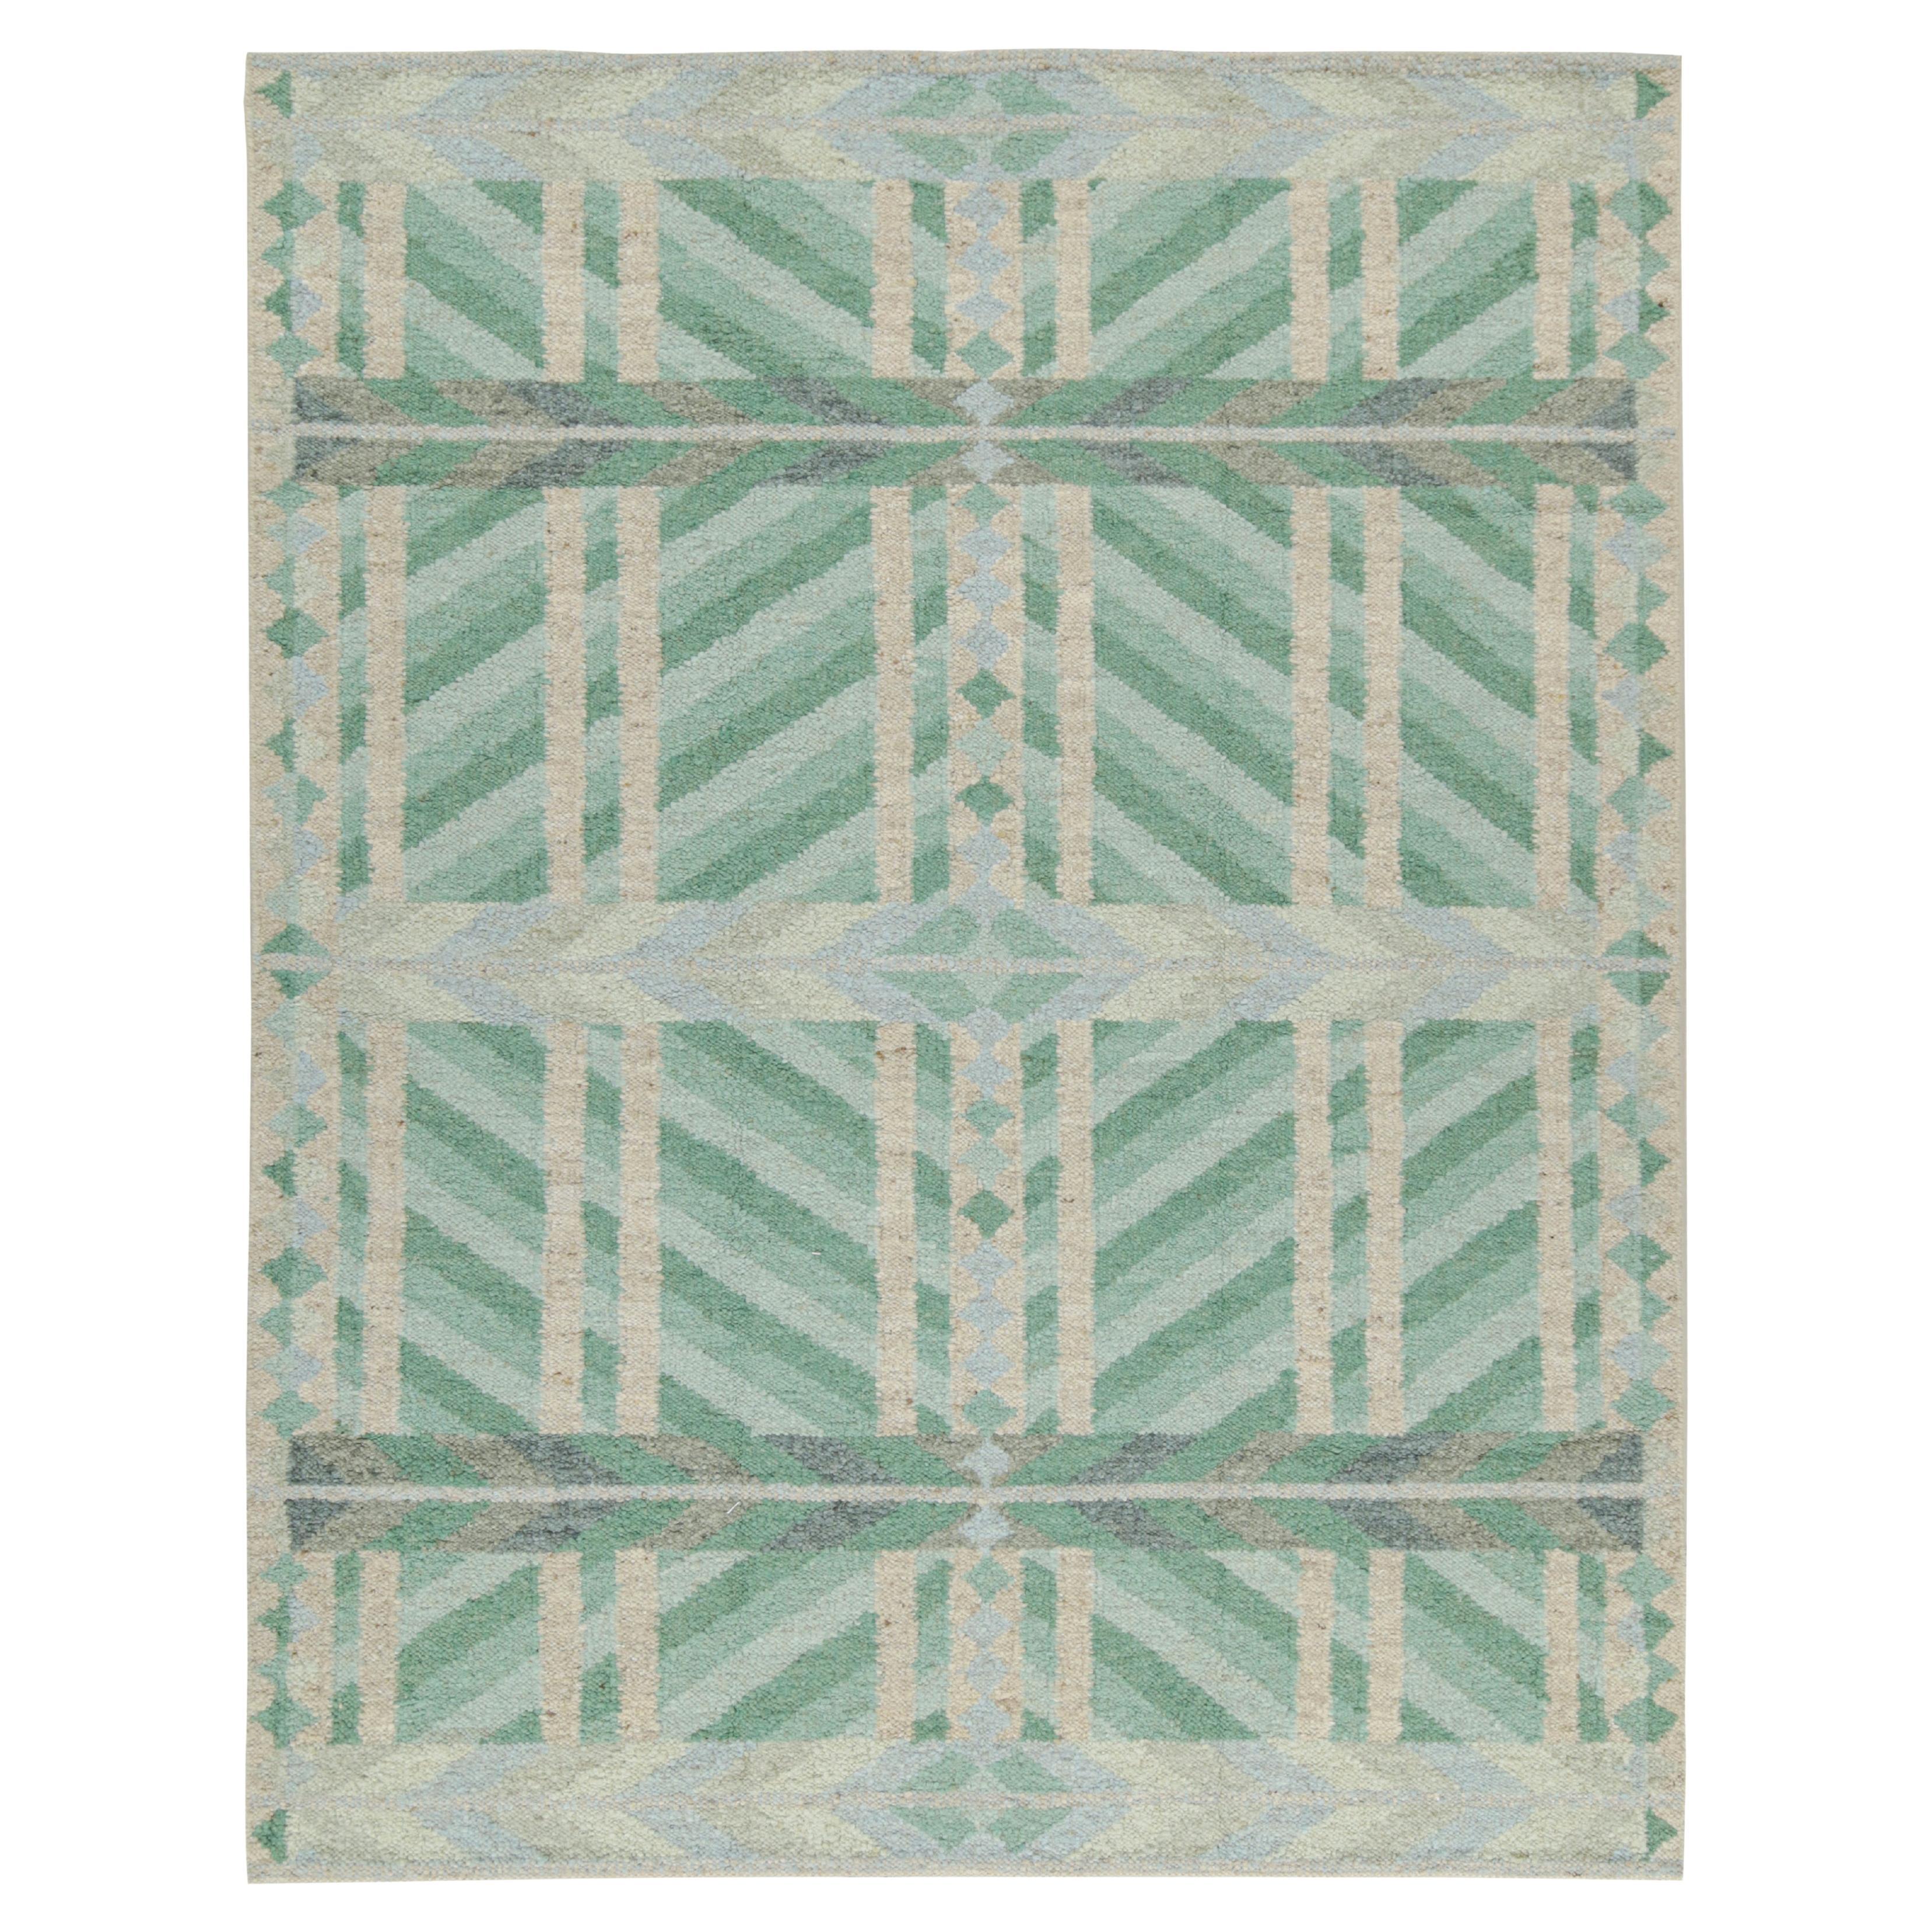 Rug & Kilim’s Scandinavian Style Kilim with Green and Blue Geometric Patterns For Sale